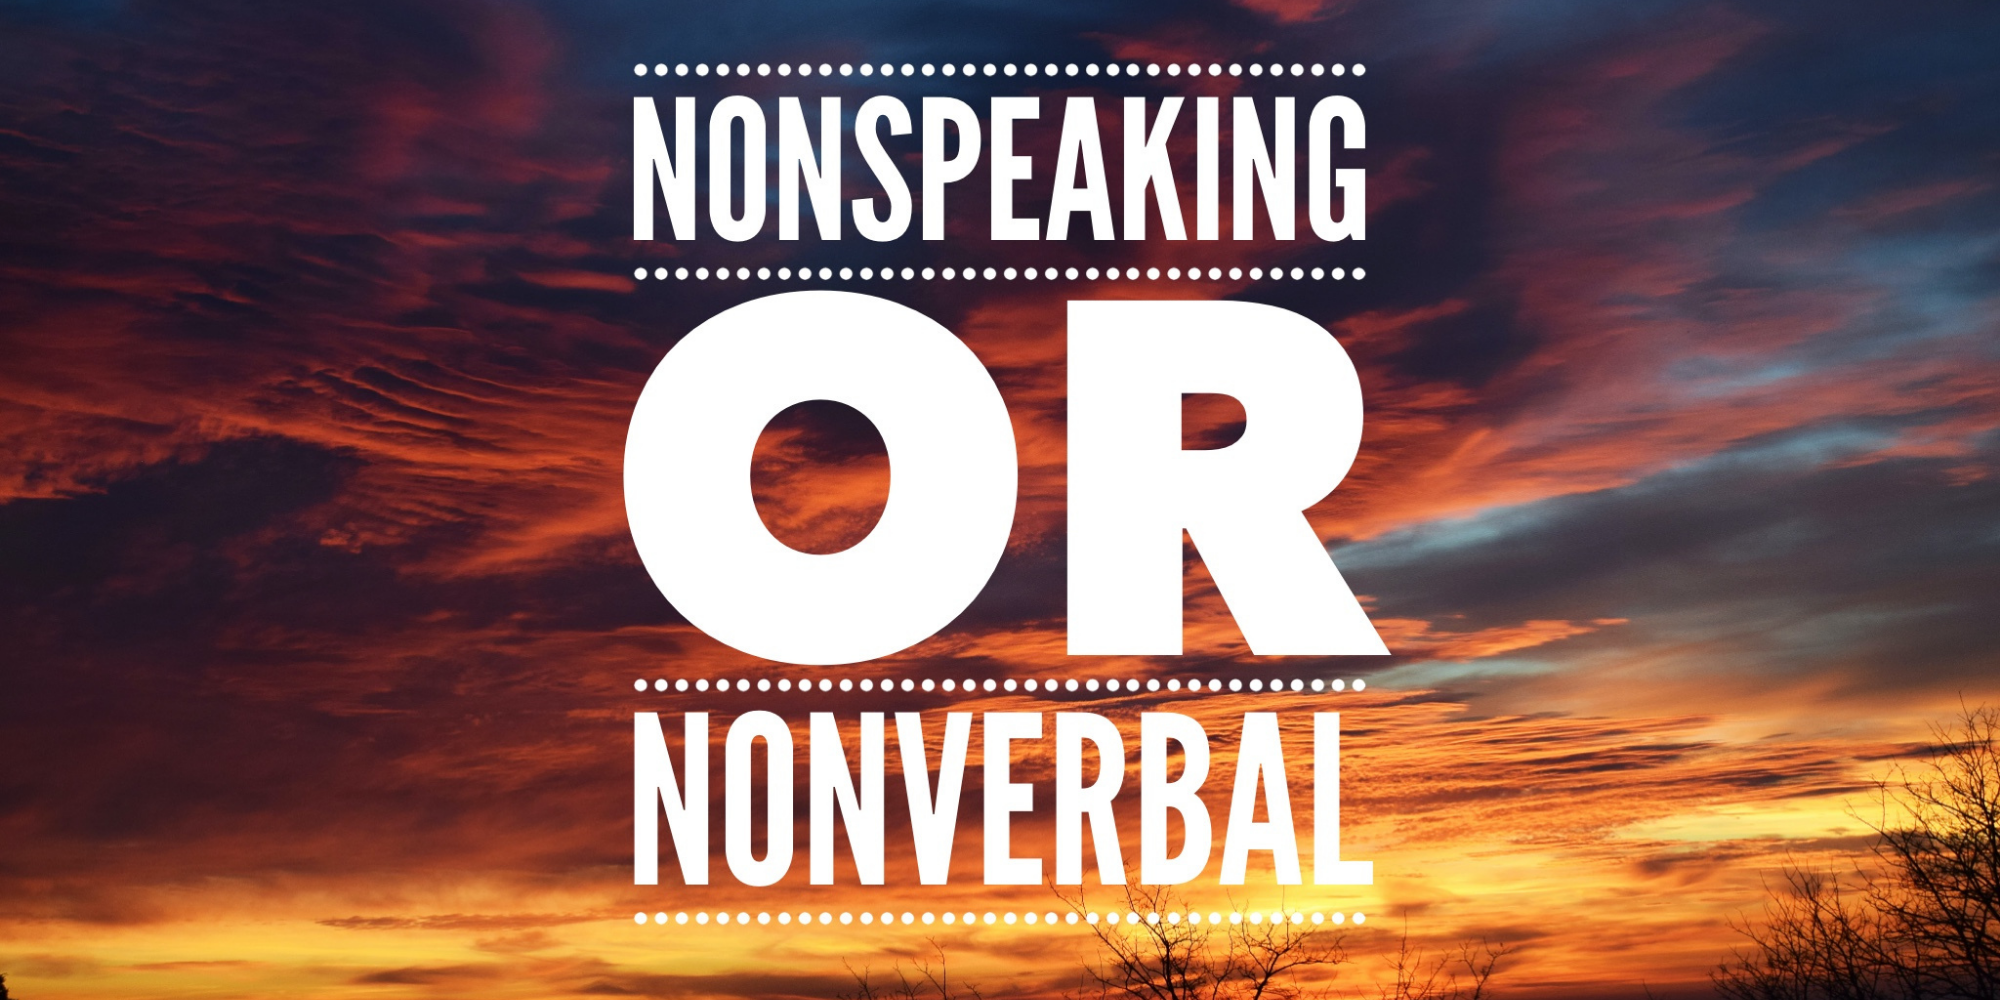 NonSpeaking or NonVerbal. Image has a colorful sky as the background.